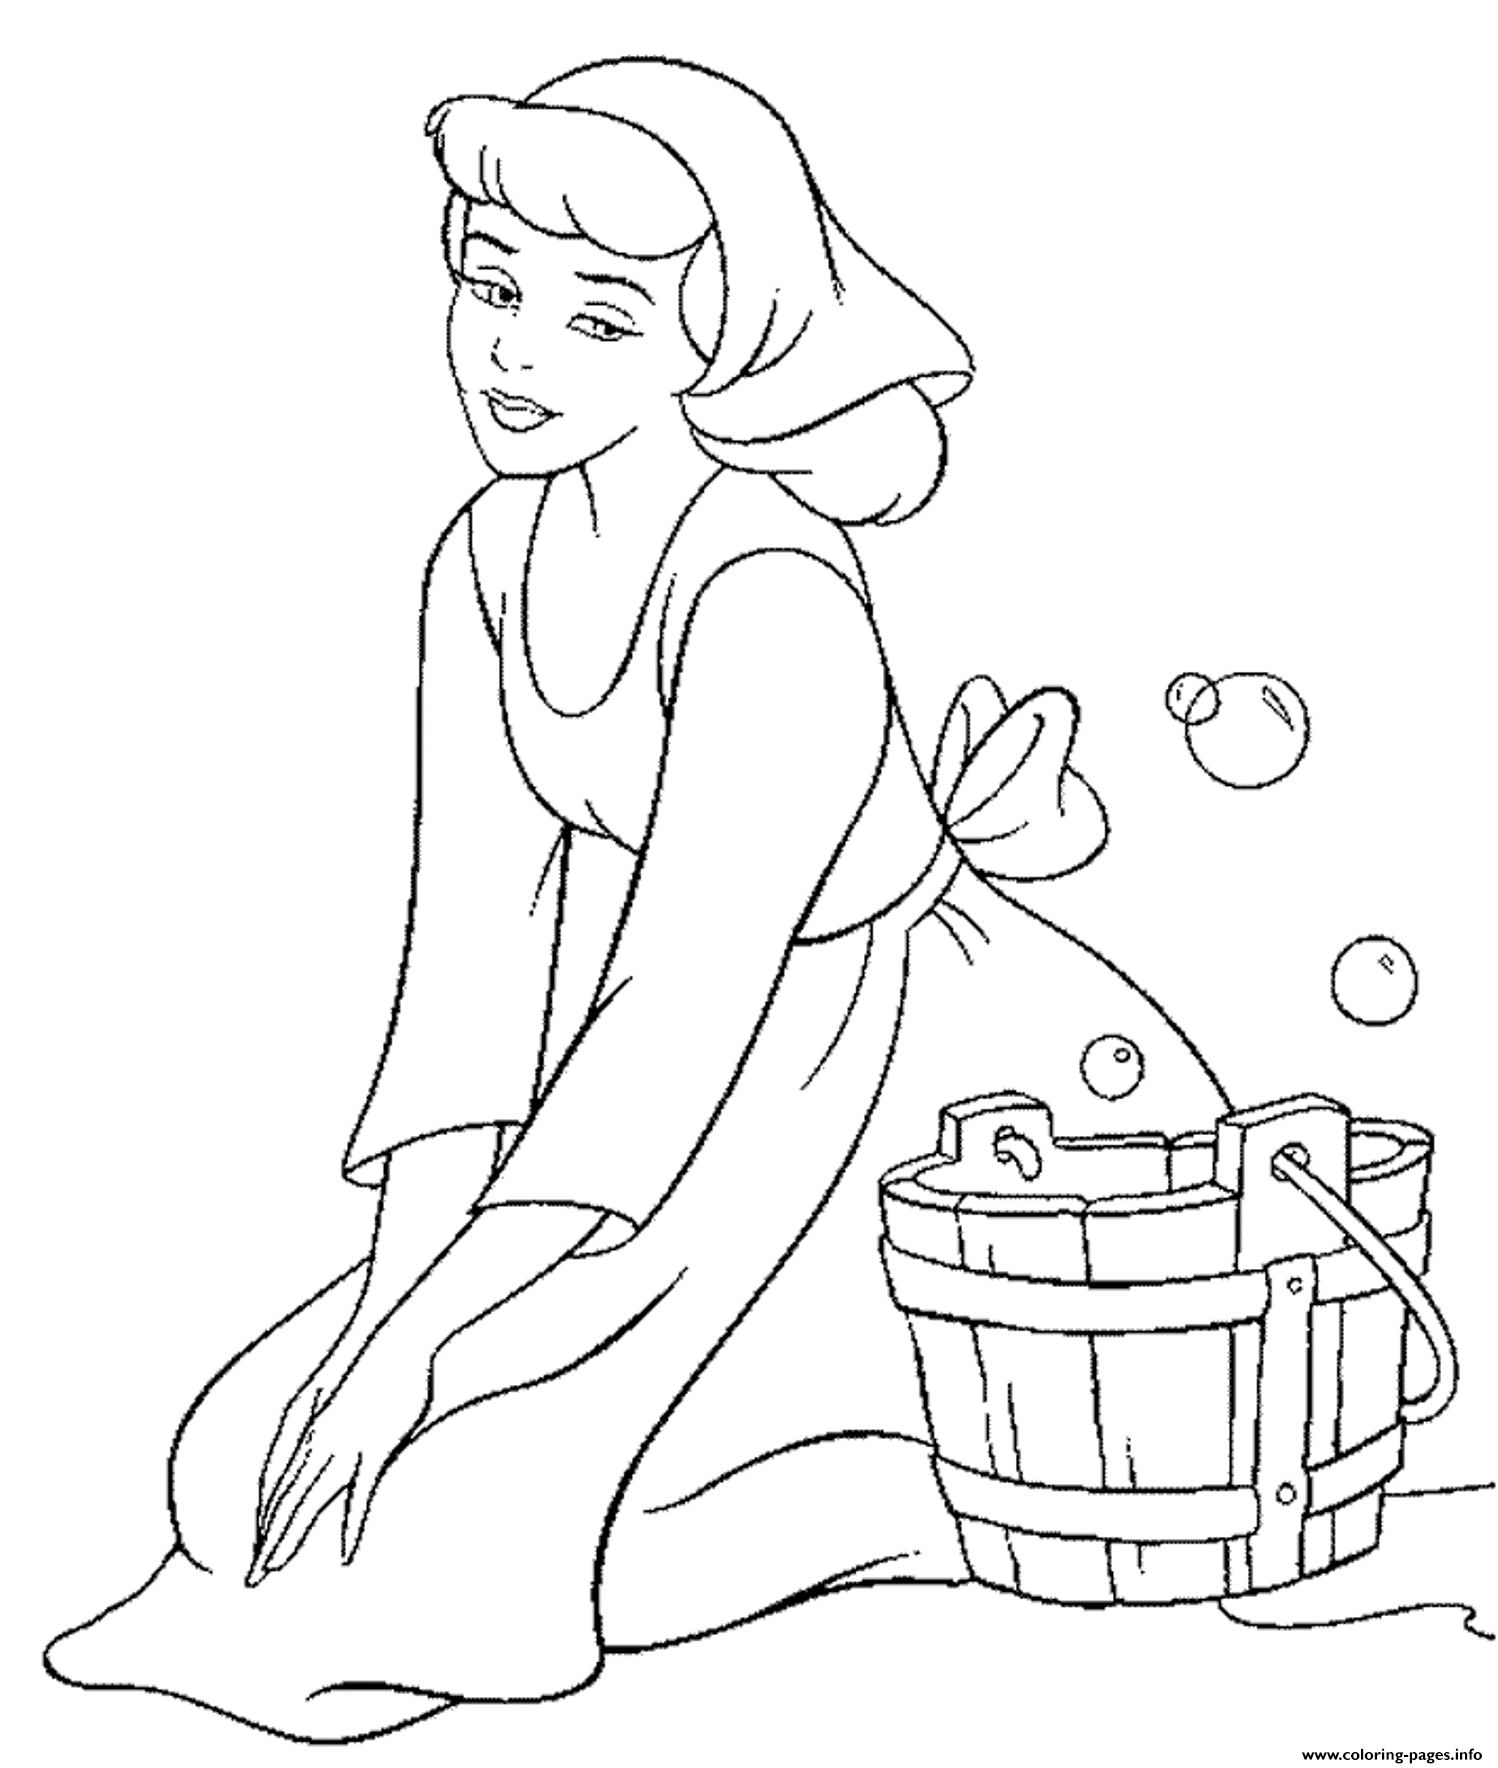 Free Cinderella Coloring Pages Colouring Pages On Cinderella Coloring Of Printable Free To Print